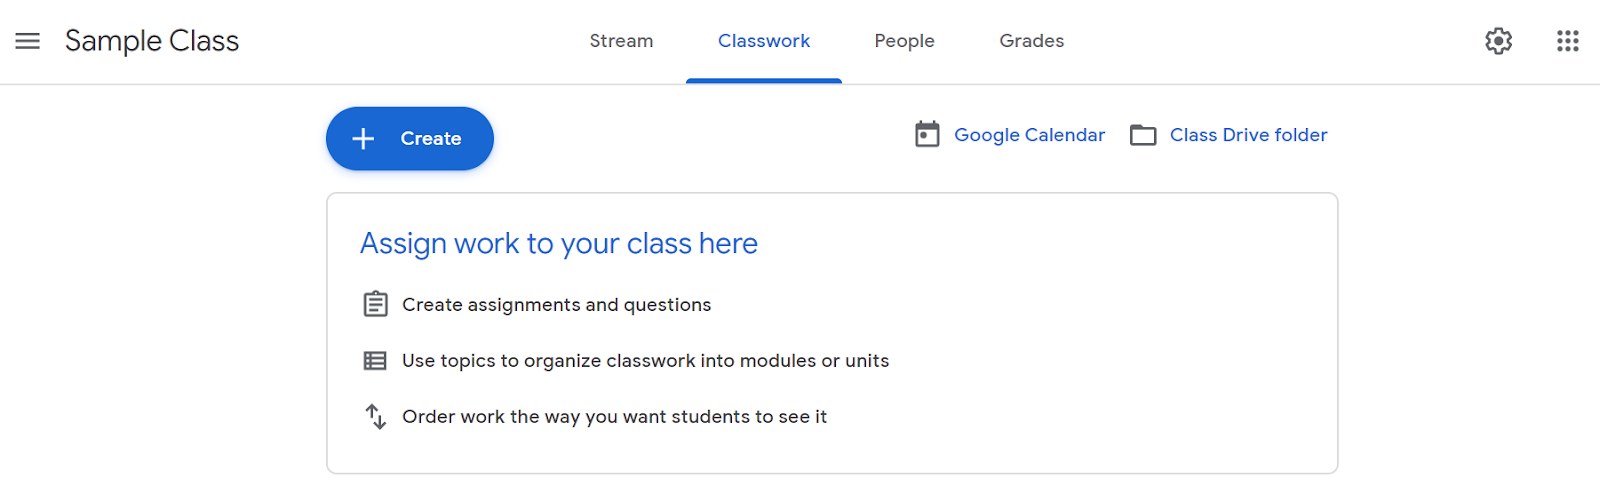 uploading assignments to google classroom